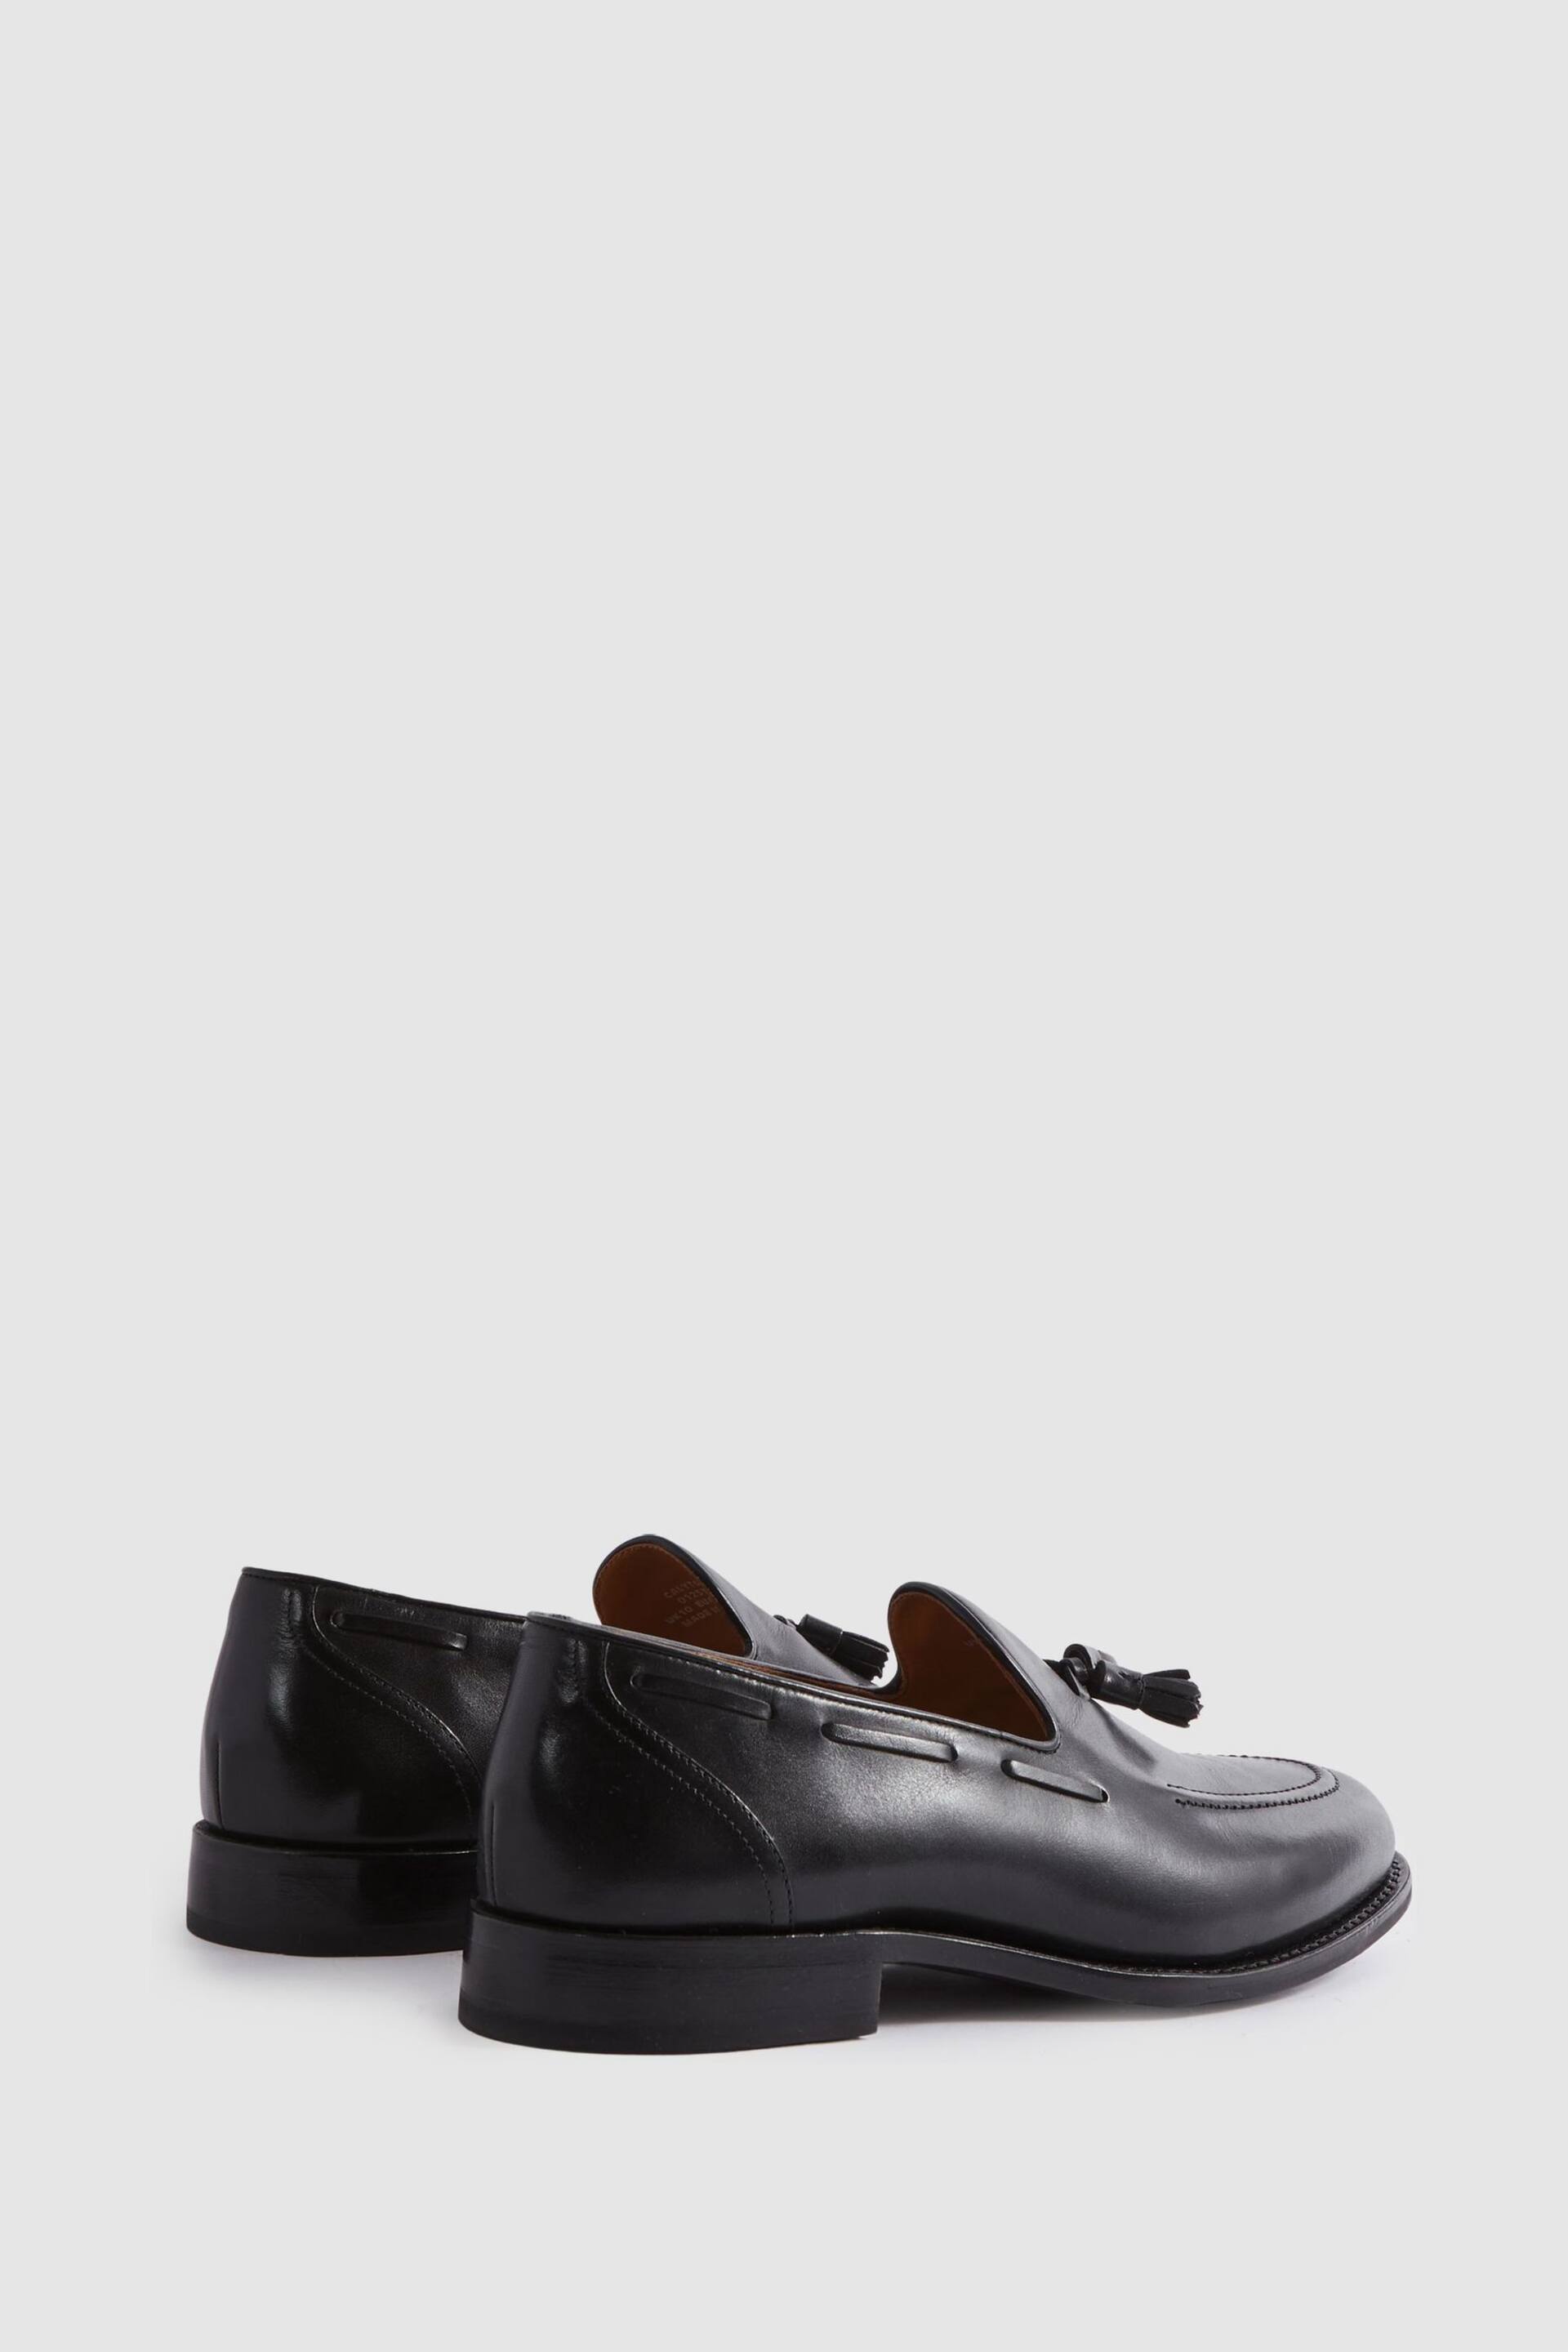 Reiss Black Clayton Leather Tassel Loafers - Image 4 of 4